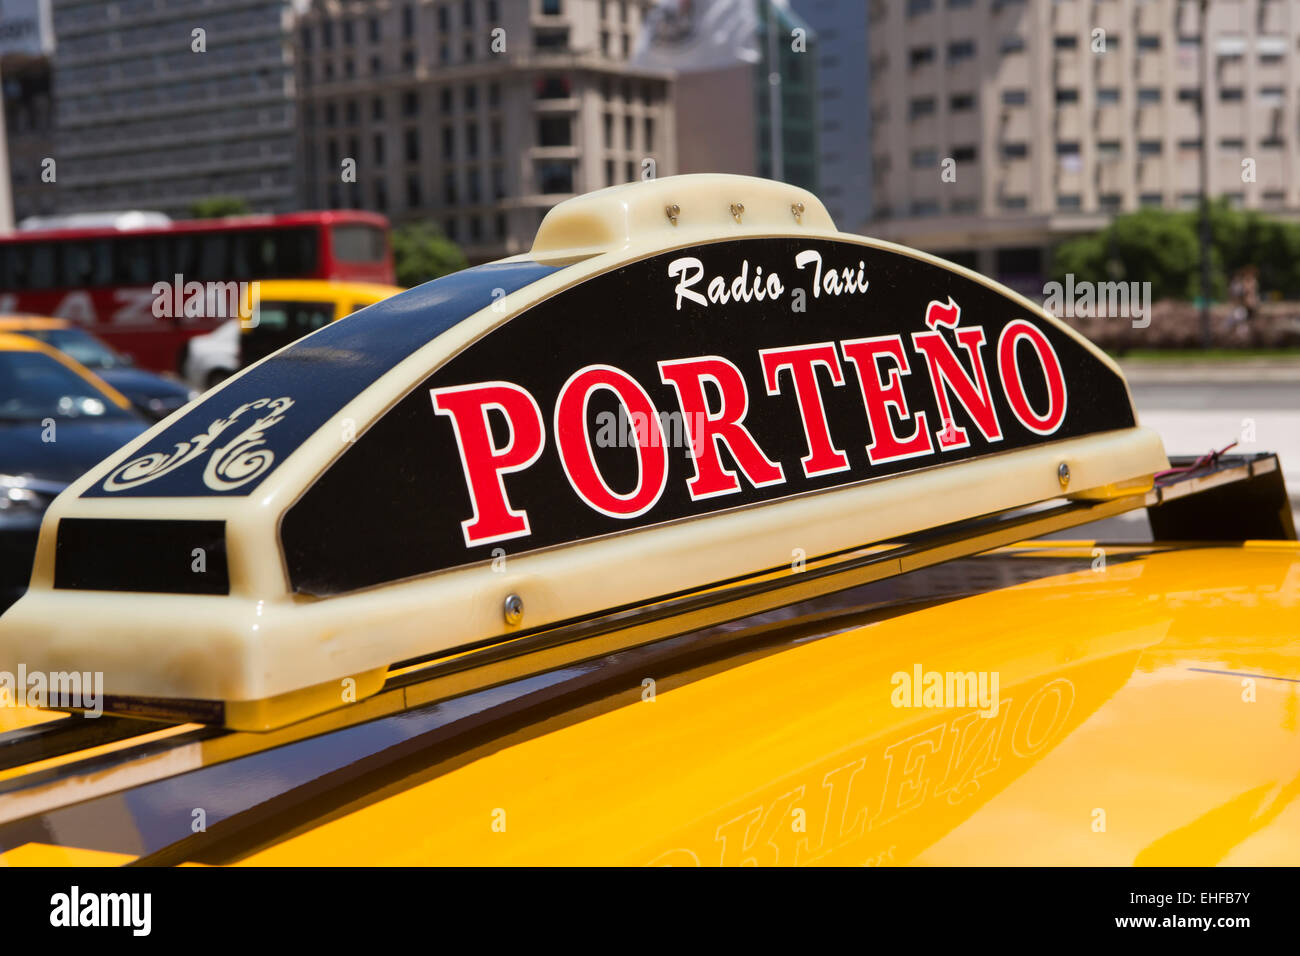 Argentina, Buenos Aires, Porteno radio taxi sign on top of cab Stock Photo